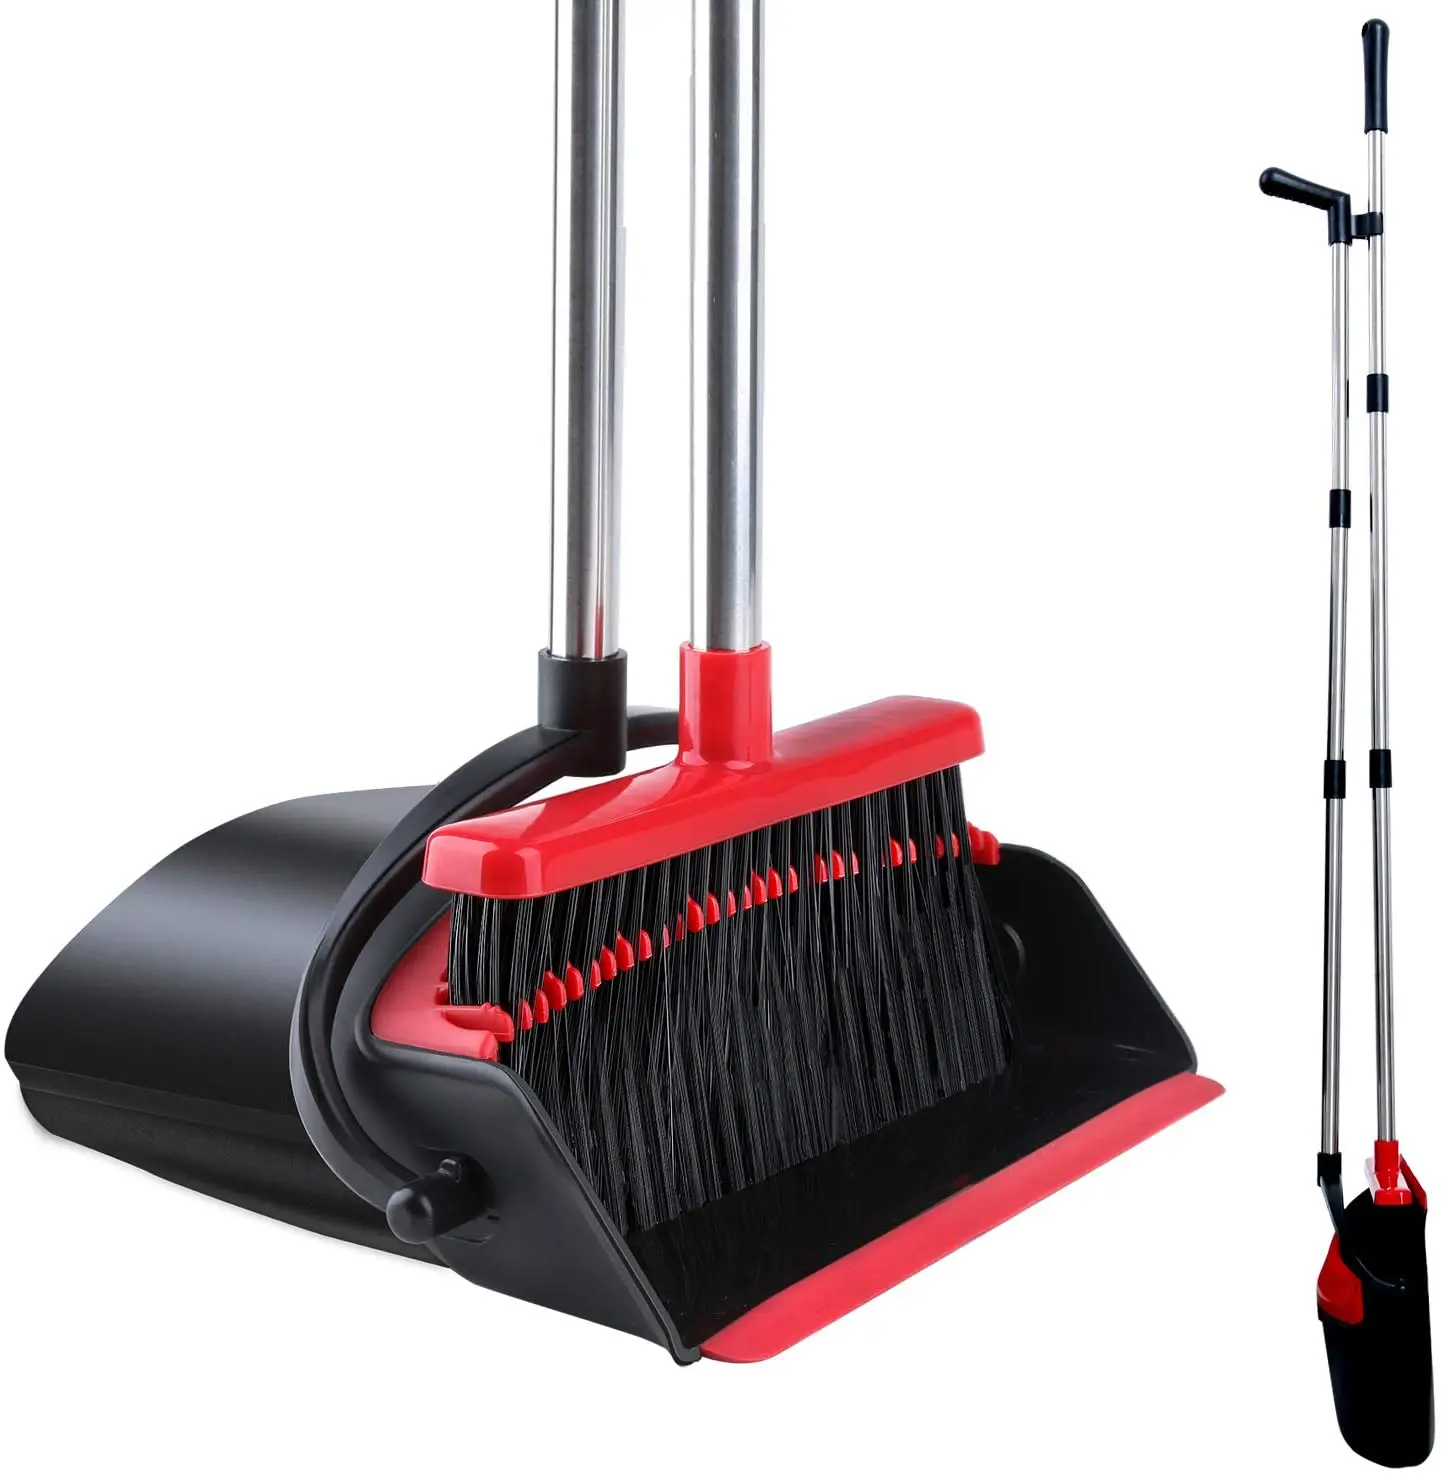 

Manufacturer whole sale Durable Material 3 in 1 sweeping tooth stick magic Long Handle folding metal broom and dustpan set, Red/black set